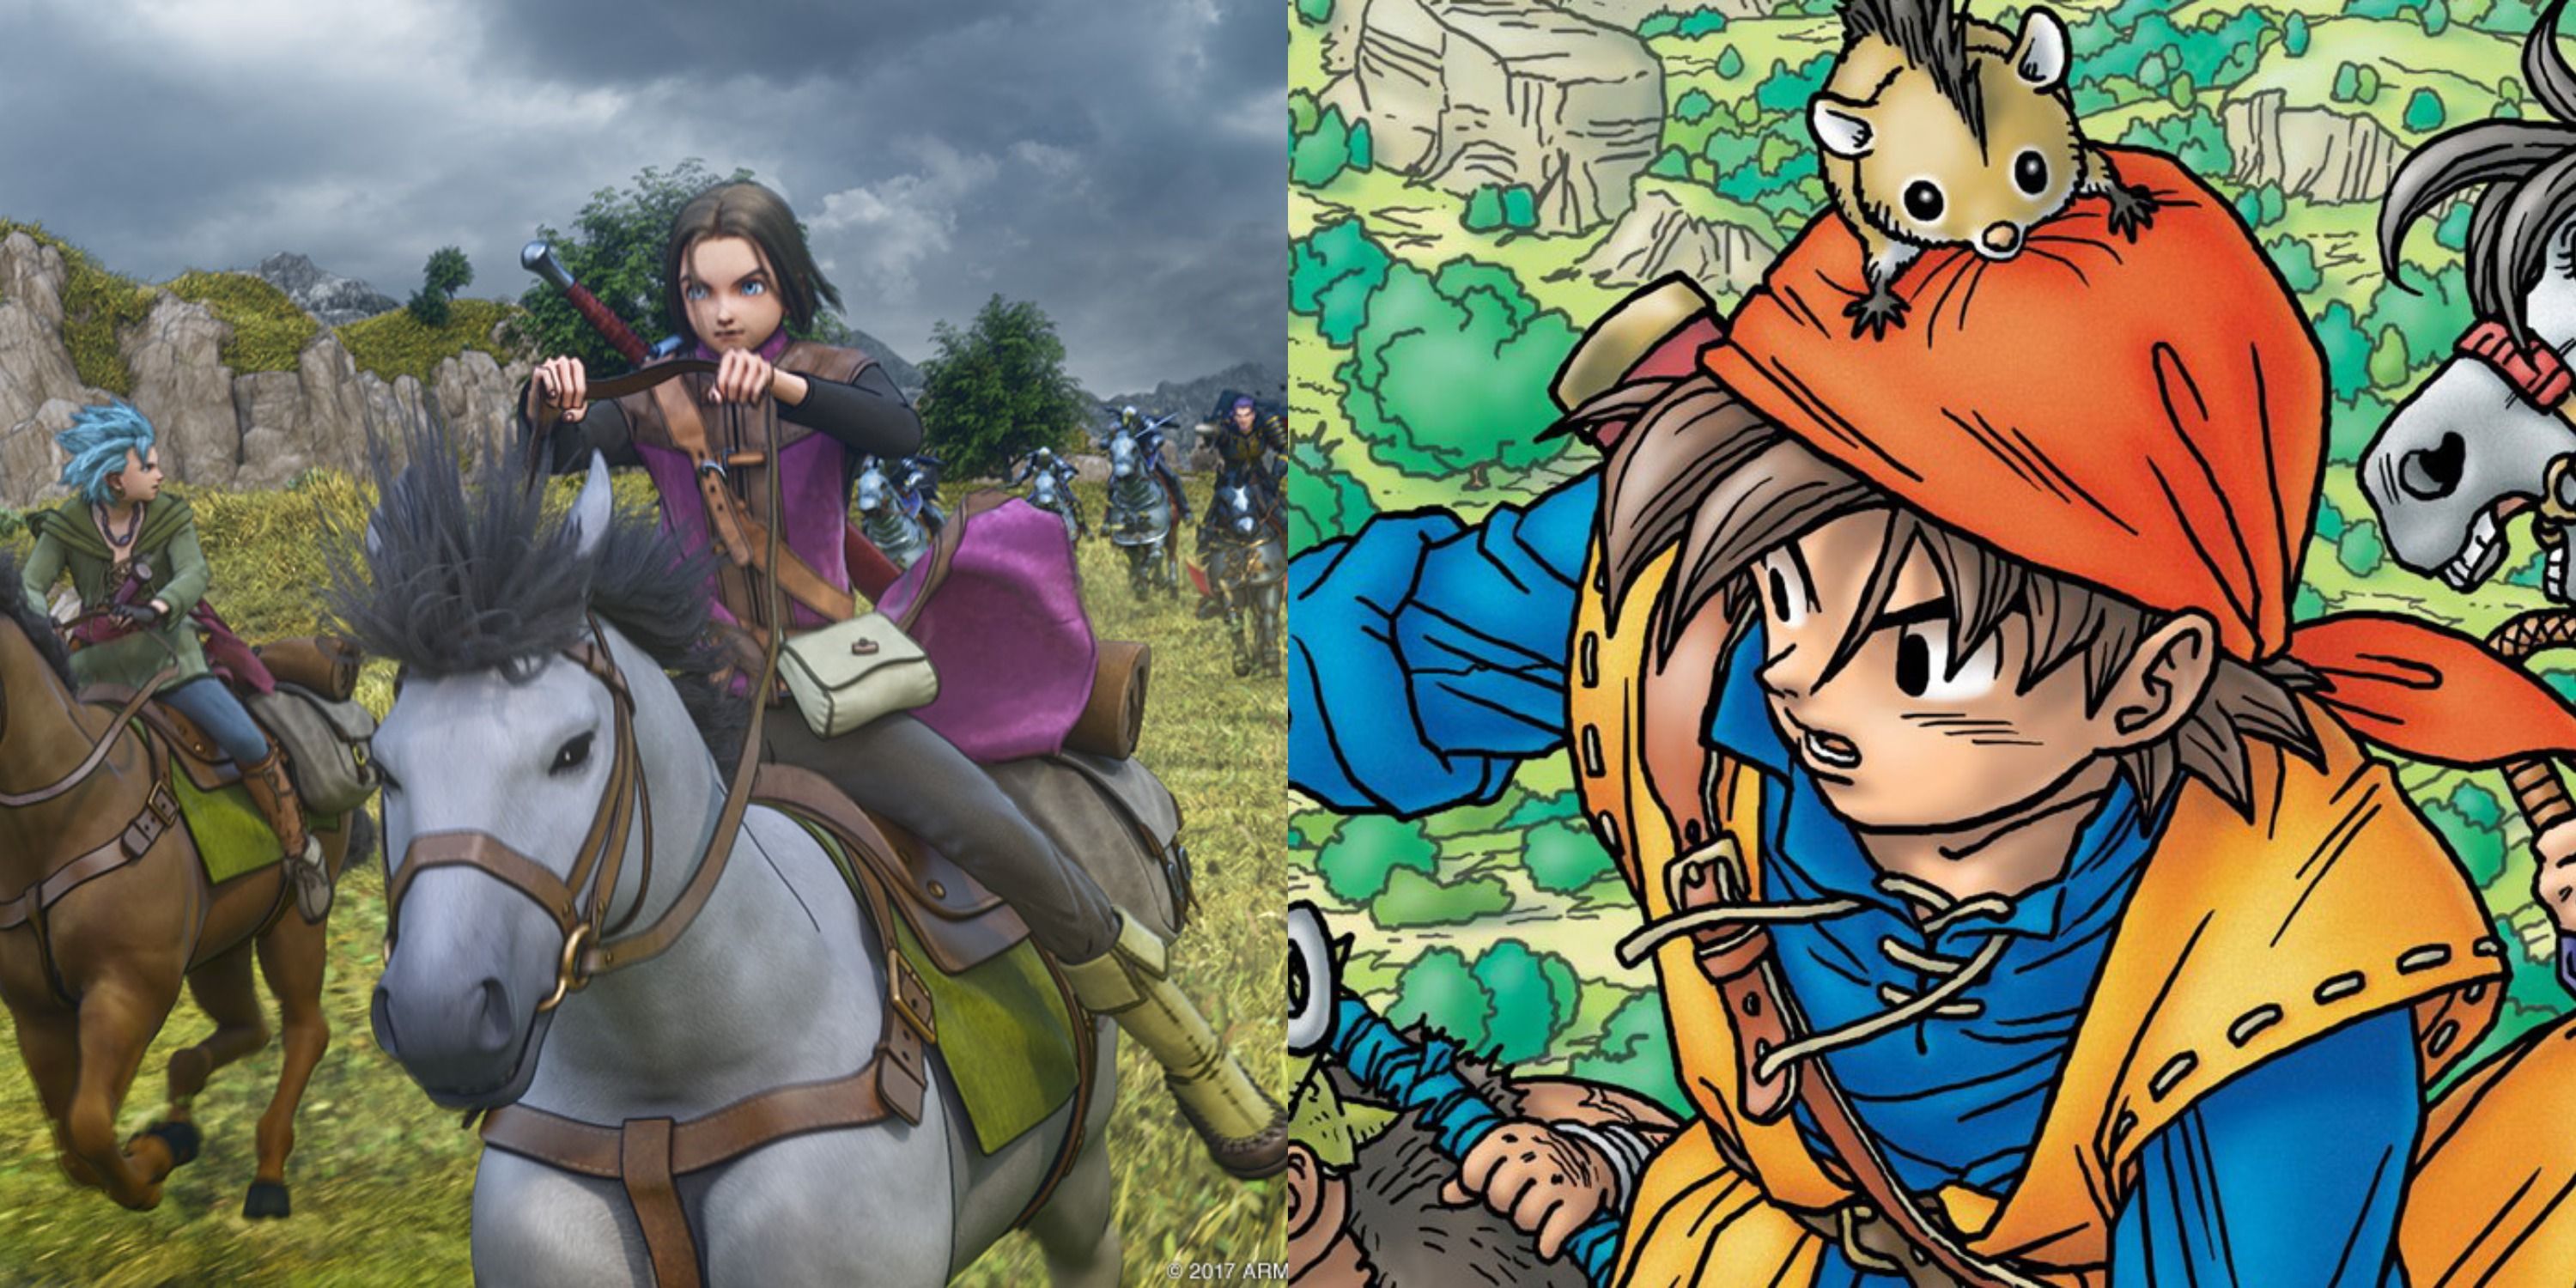 Dragon Quest: The 10 Best Games In The Series, According To Metacritic